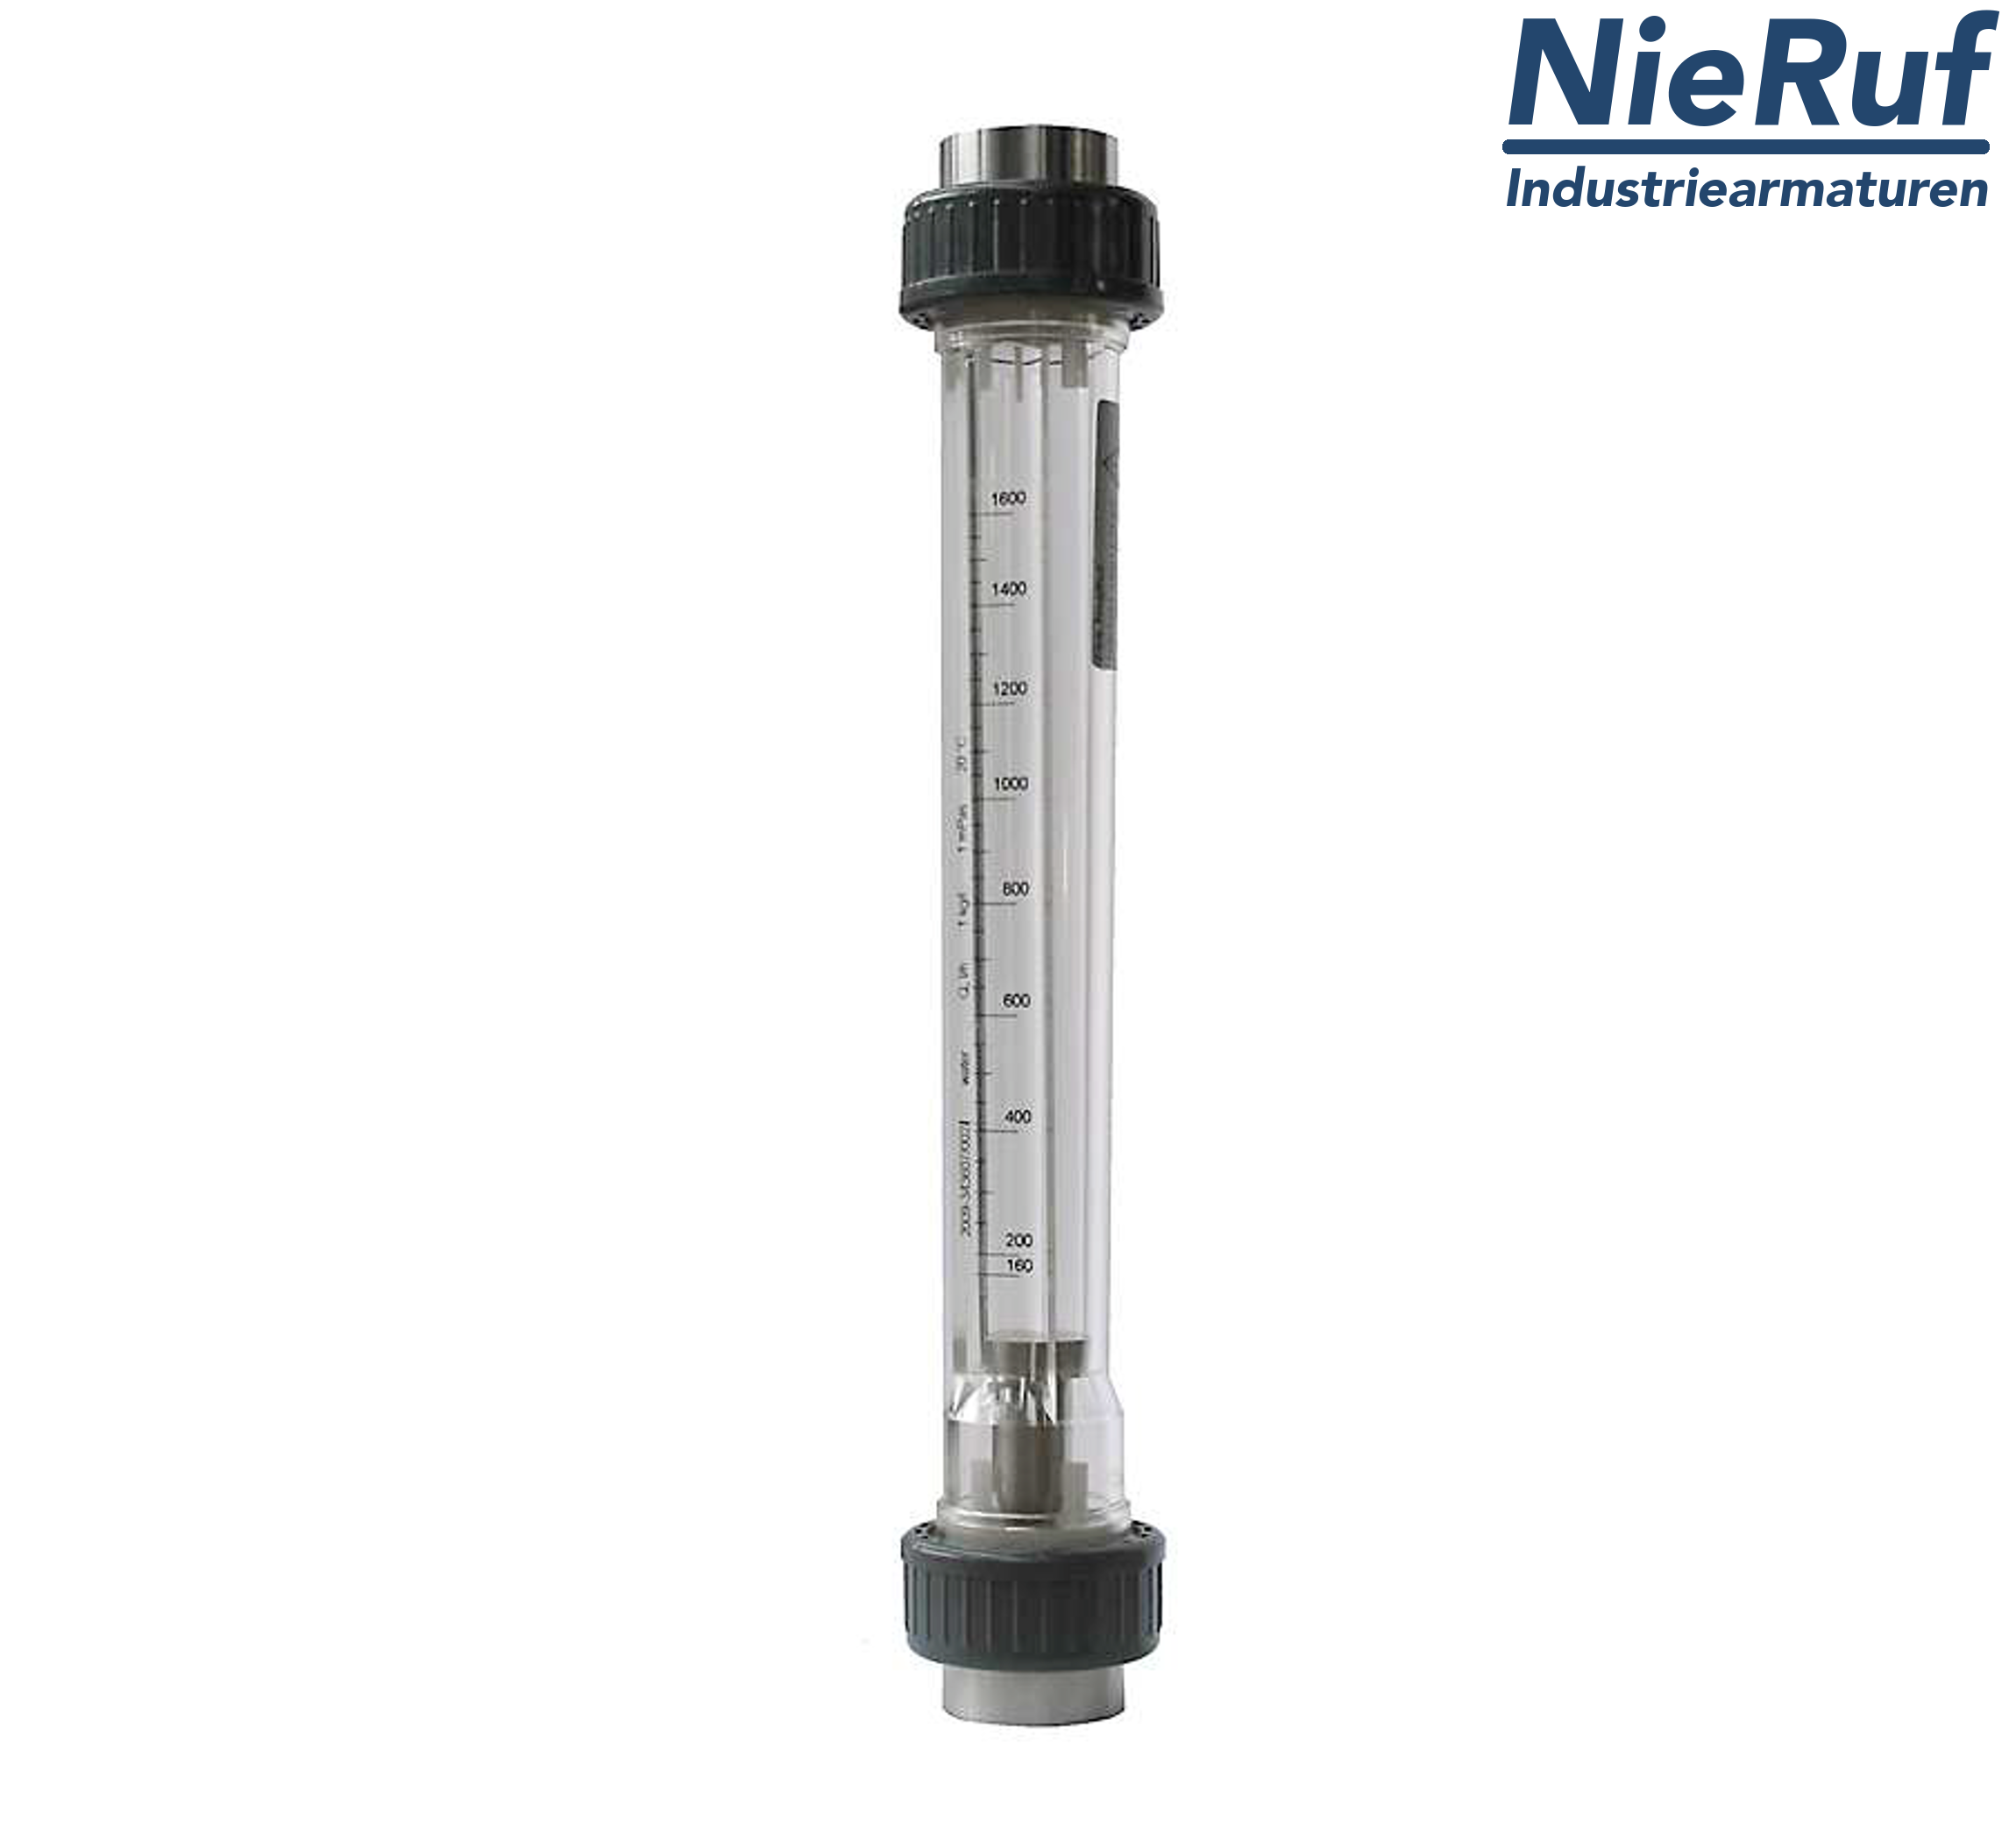 Variable area flowmeter 1 1/2" inch 4000.0 - 16000 l/h water FKM